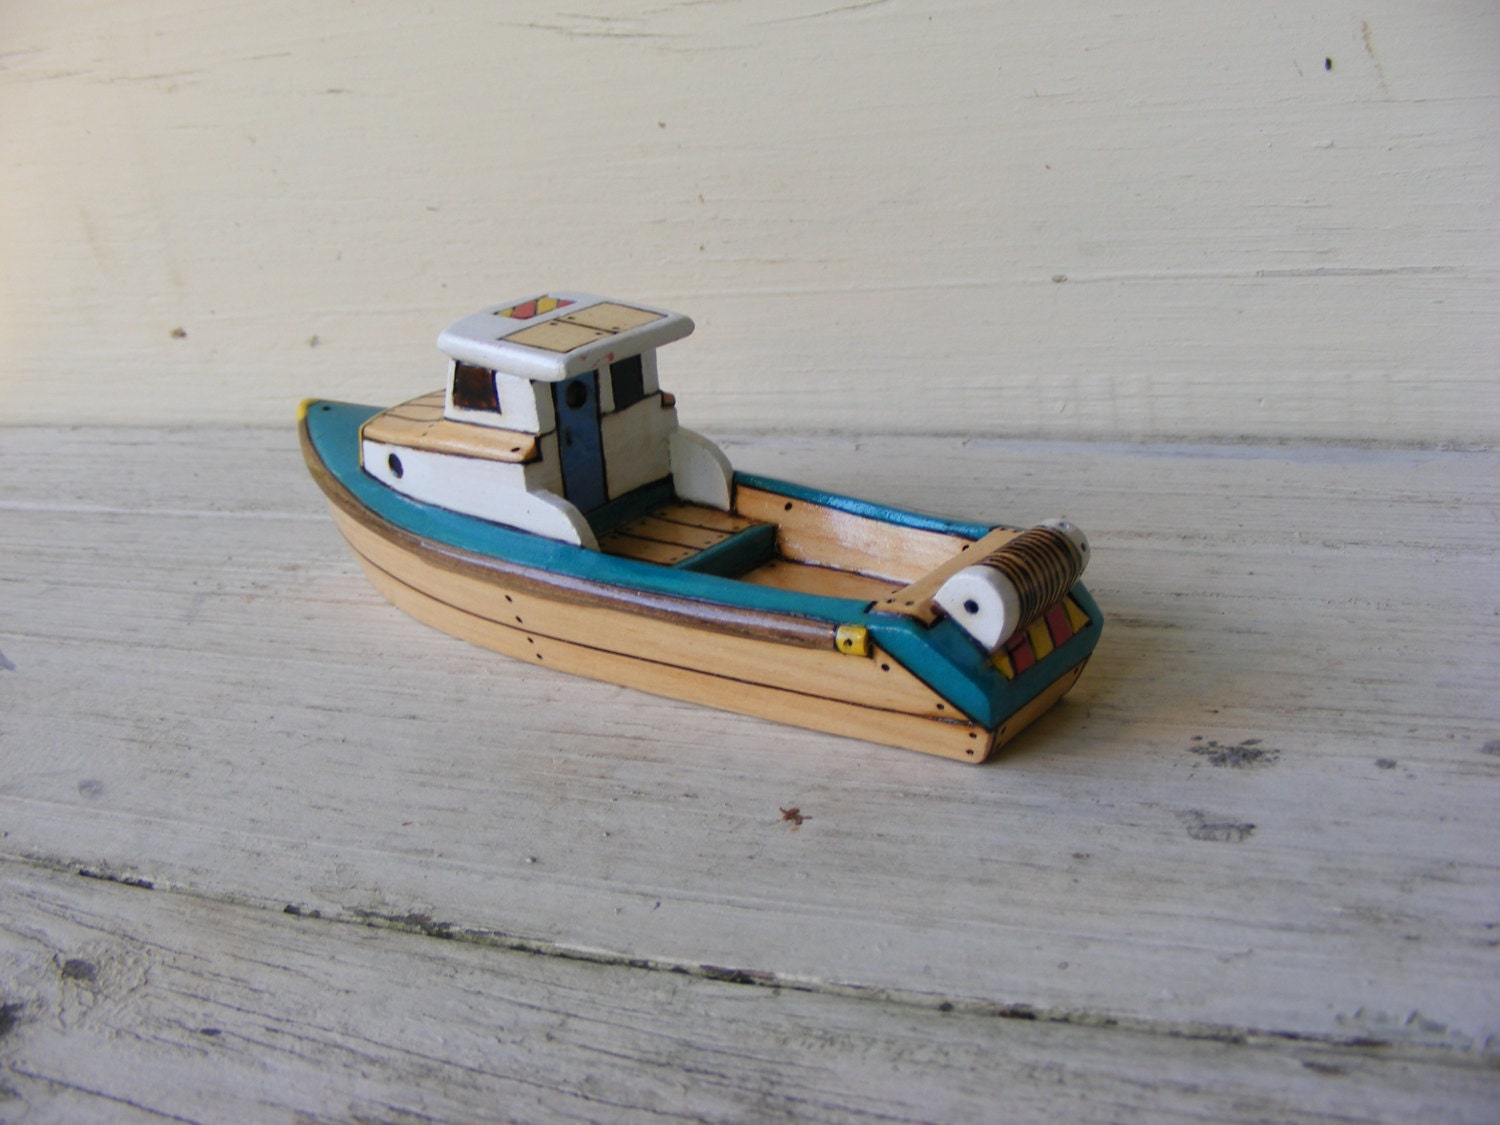 Green Skeena Wooden Toy Gillnet Fishing Boat by ToyBoatWorks